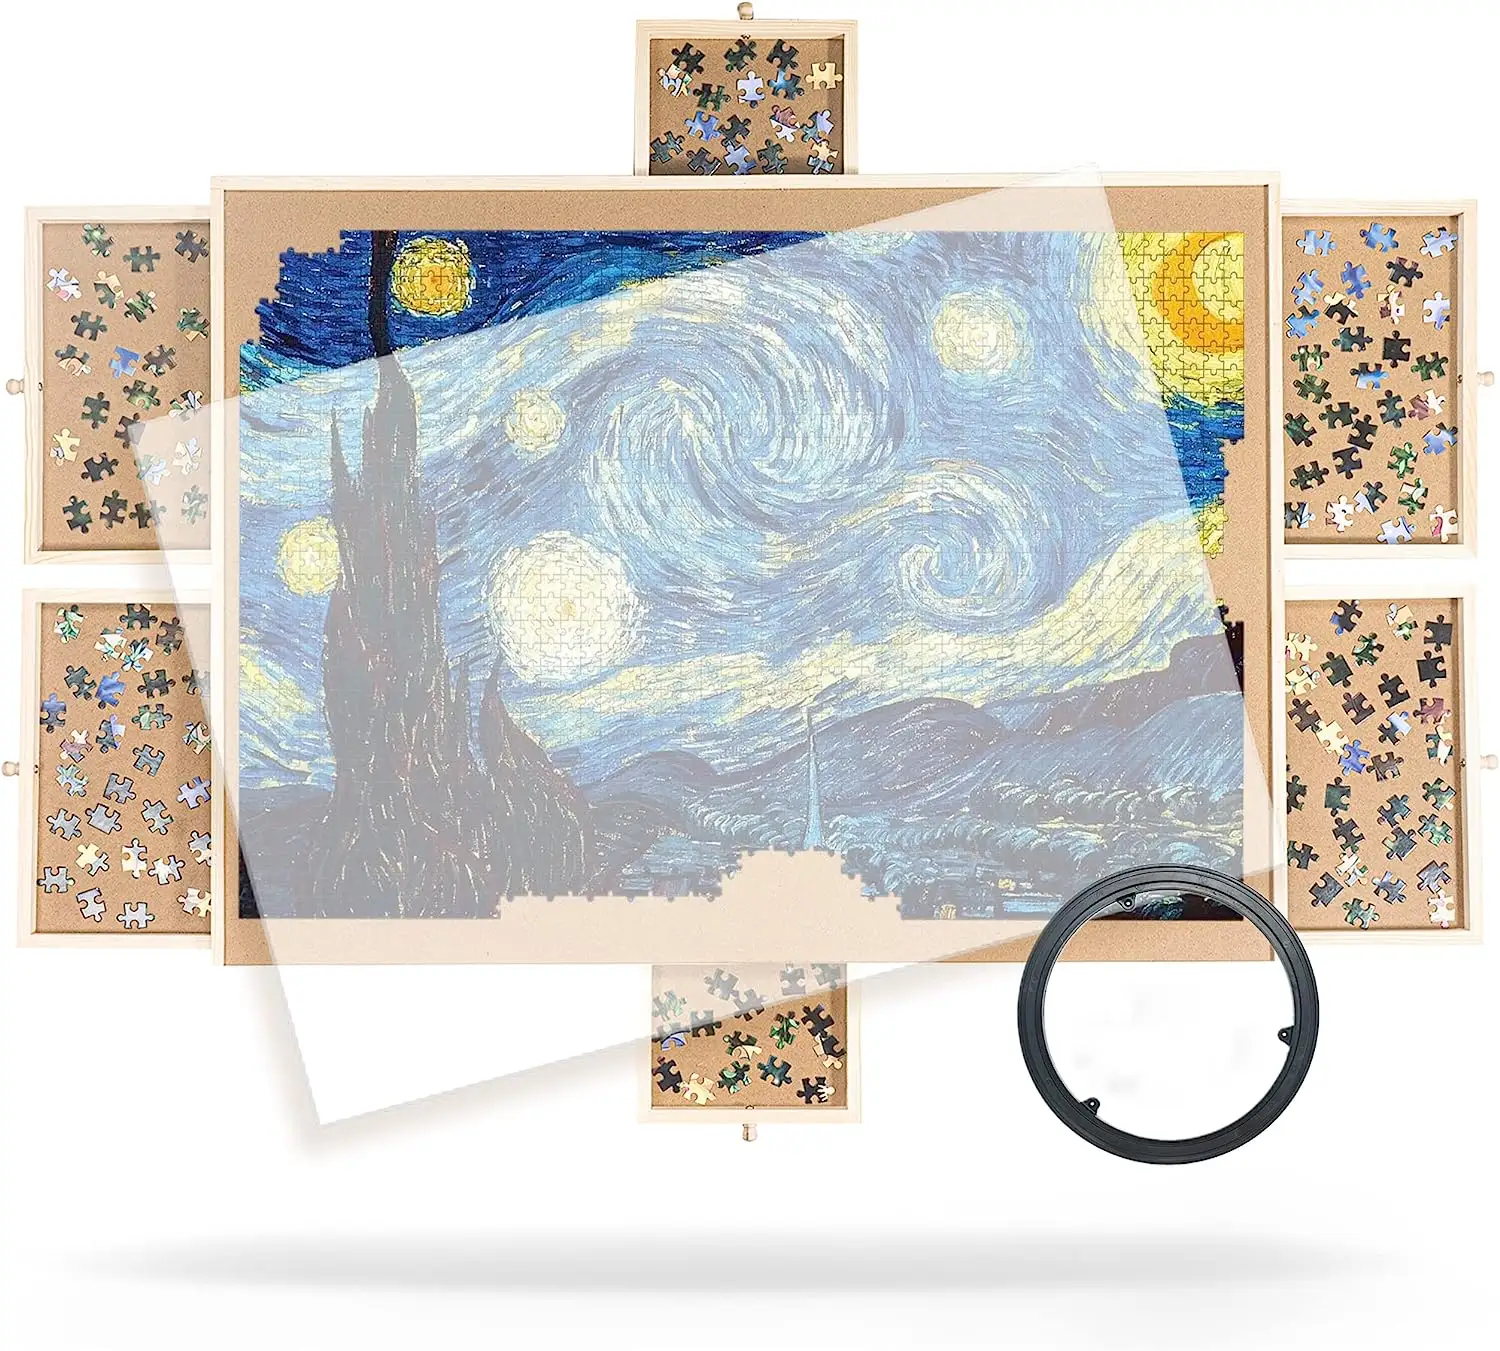 portable jigsaw puzzle board with drawing 1500 piece wooden jigsaw folding puzzle board